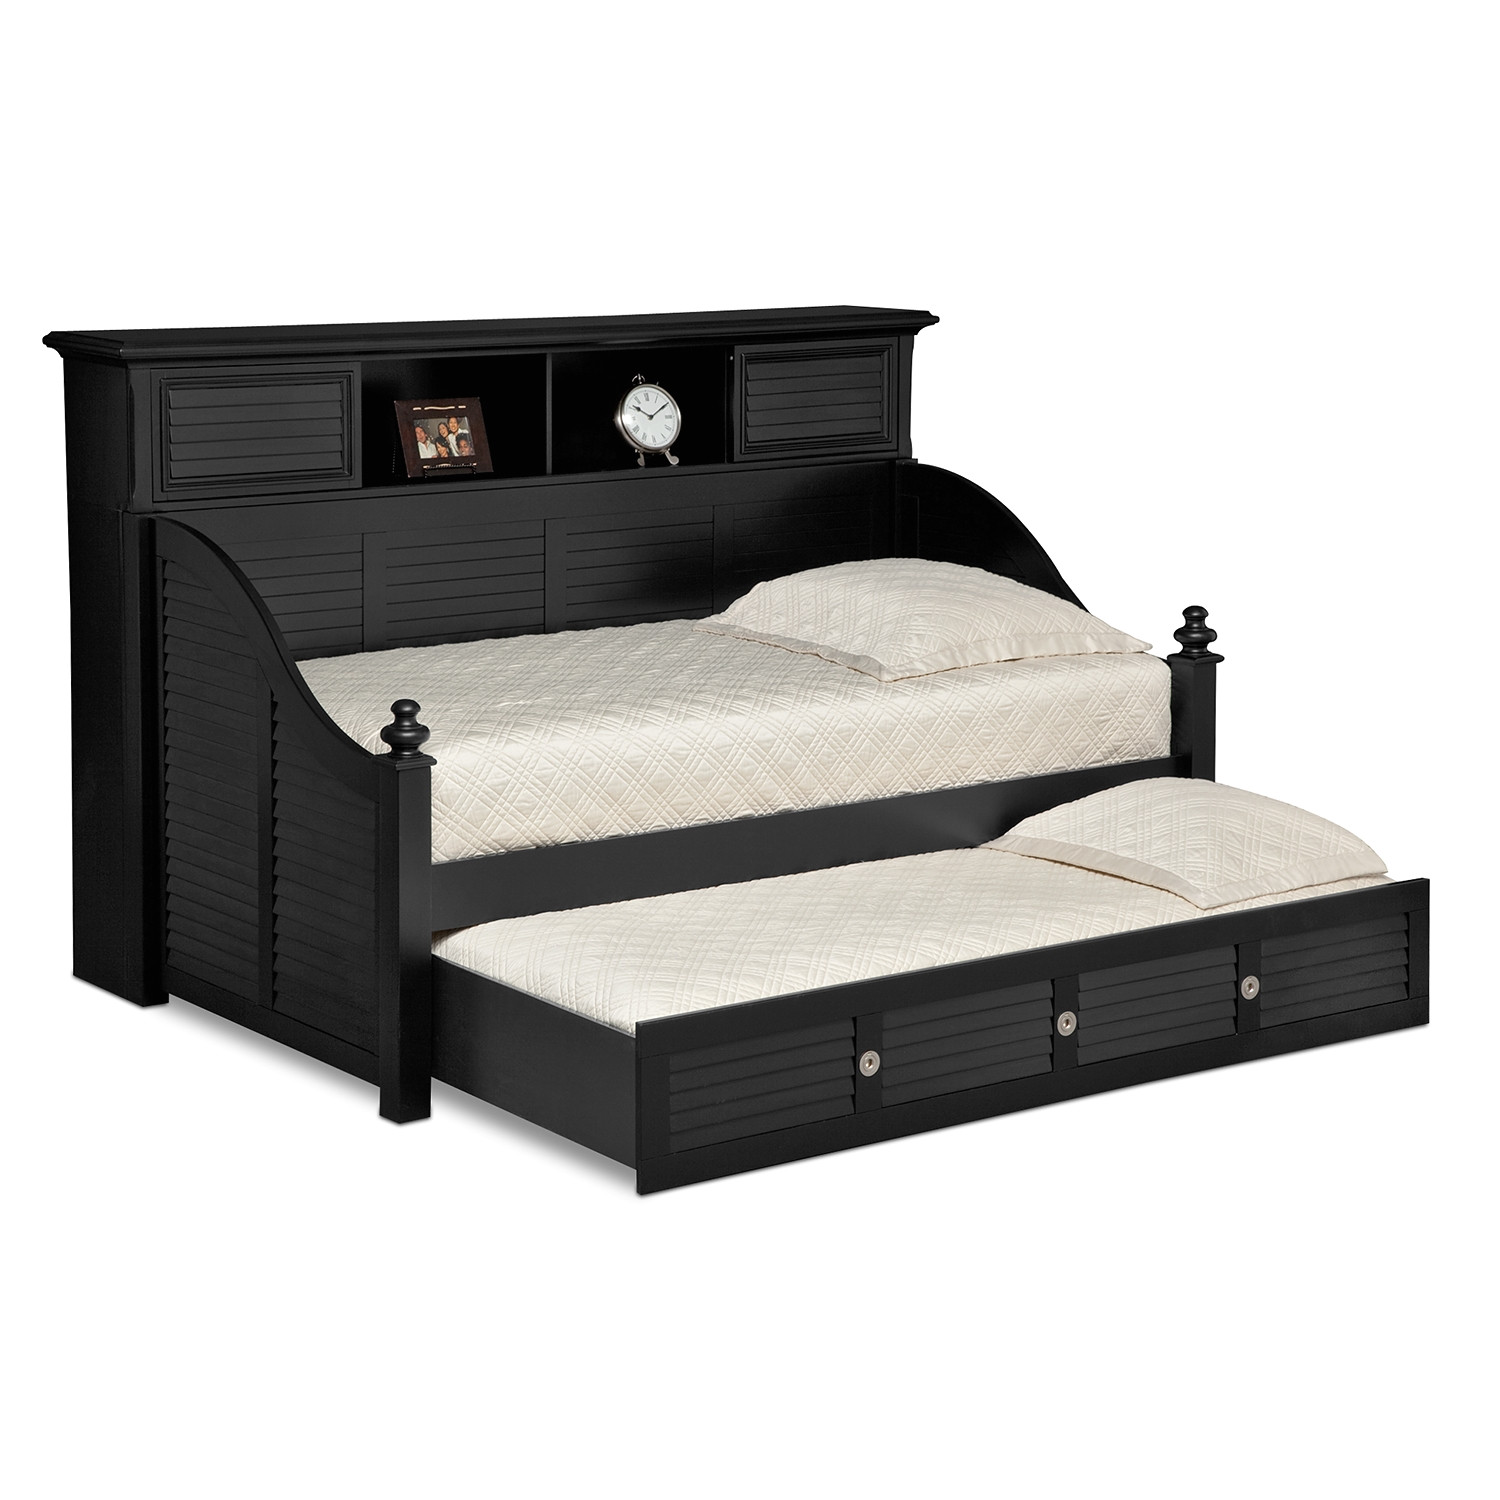 curtain cheap daybeds with trundle daybed beds and mattress discount day prices bed frame d